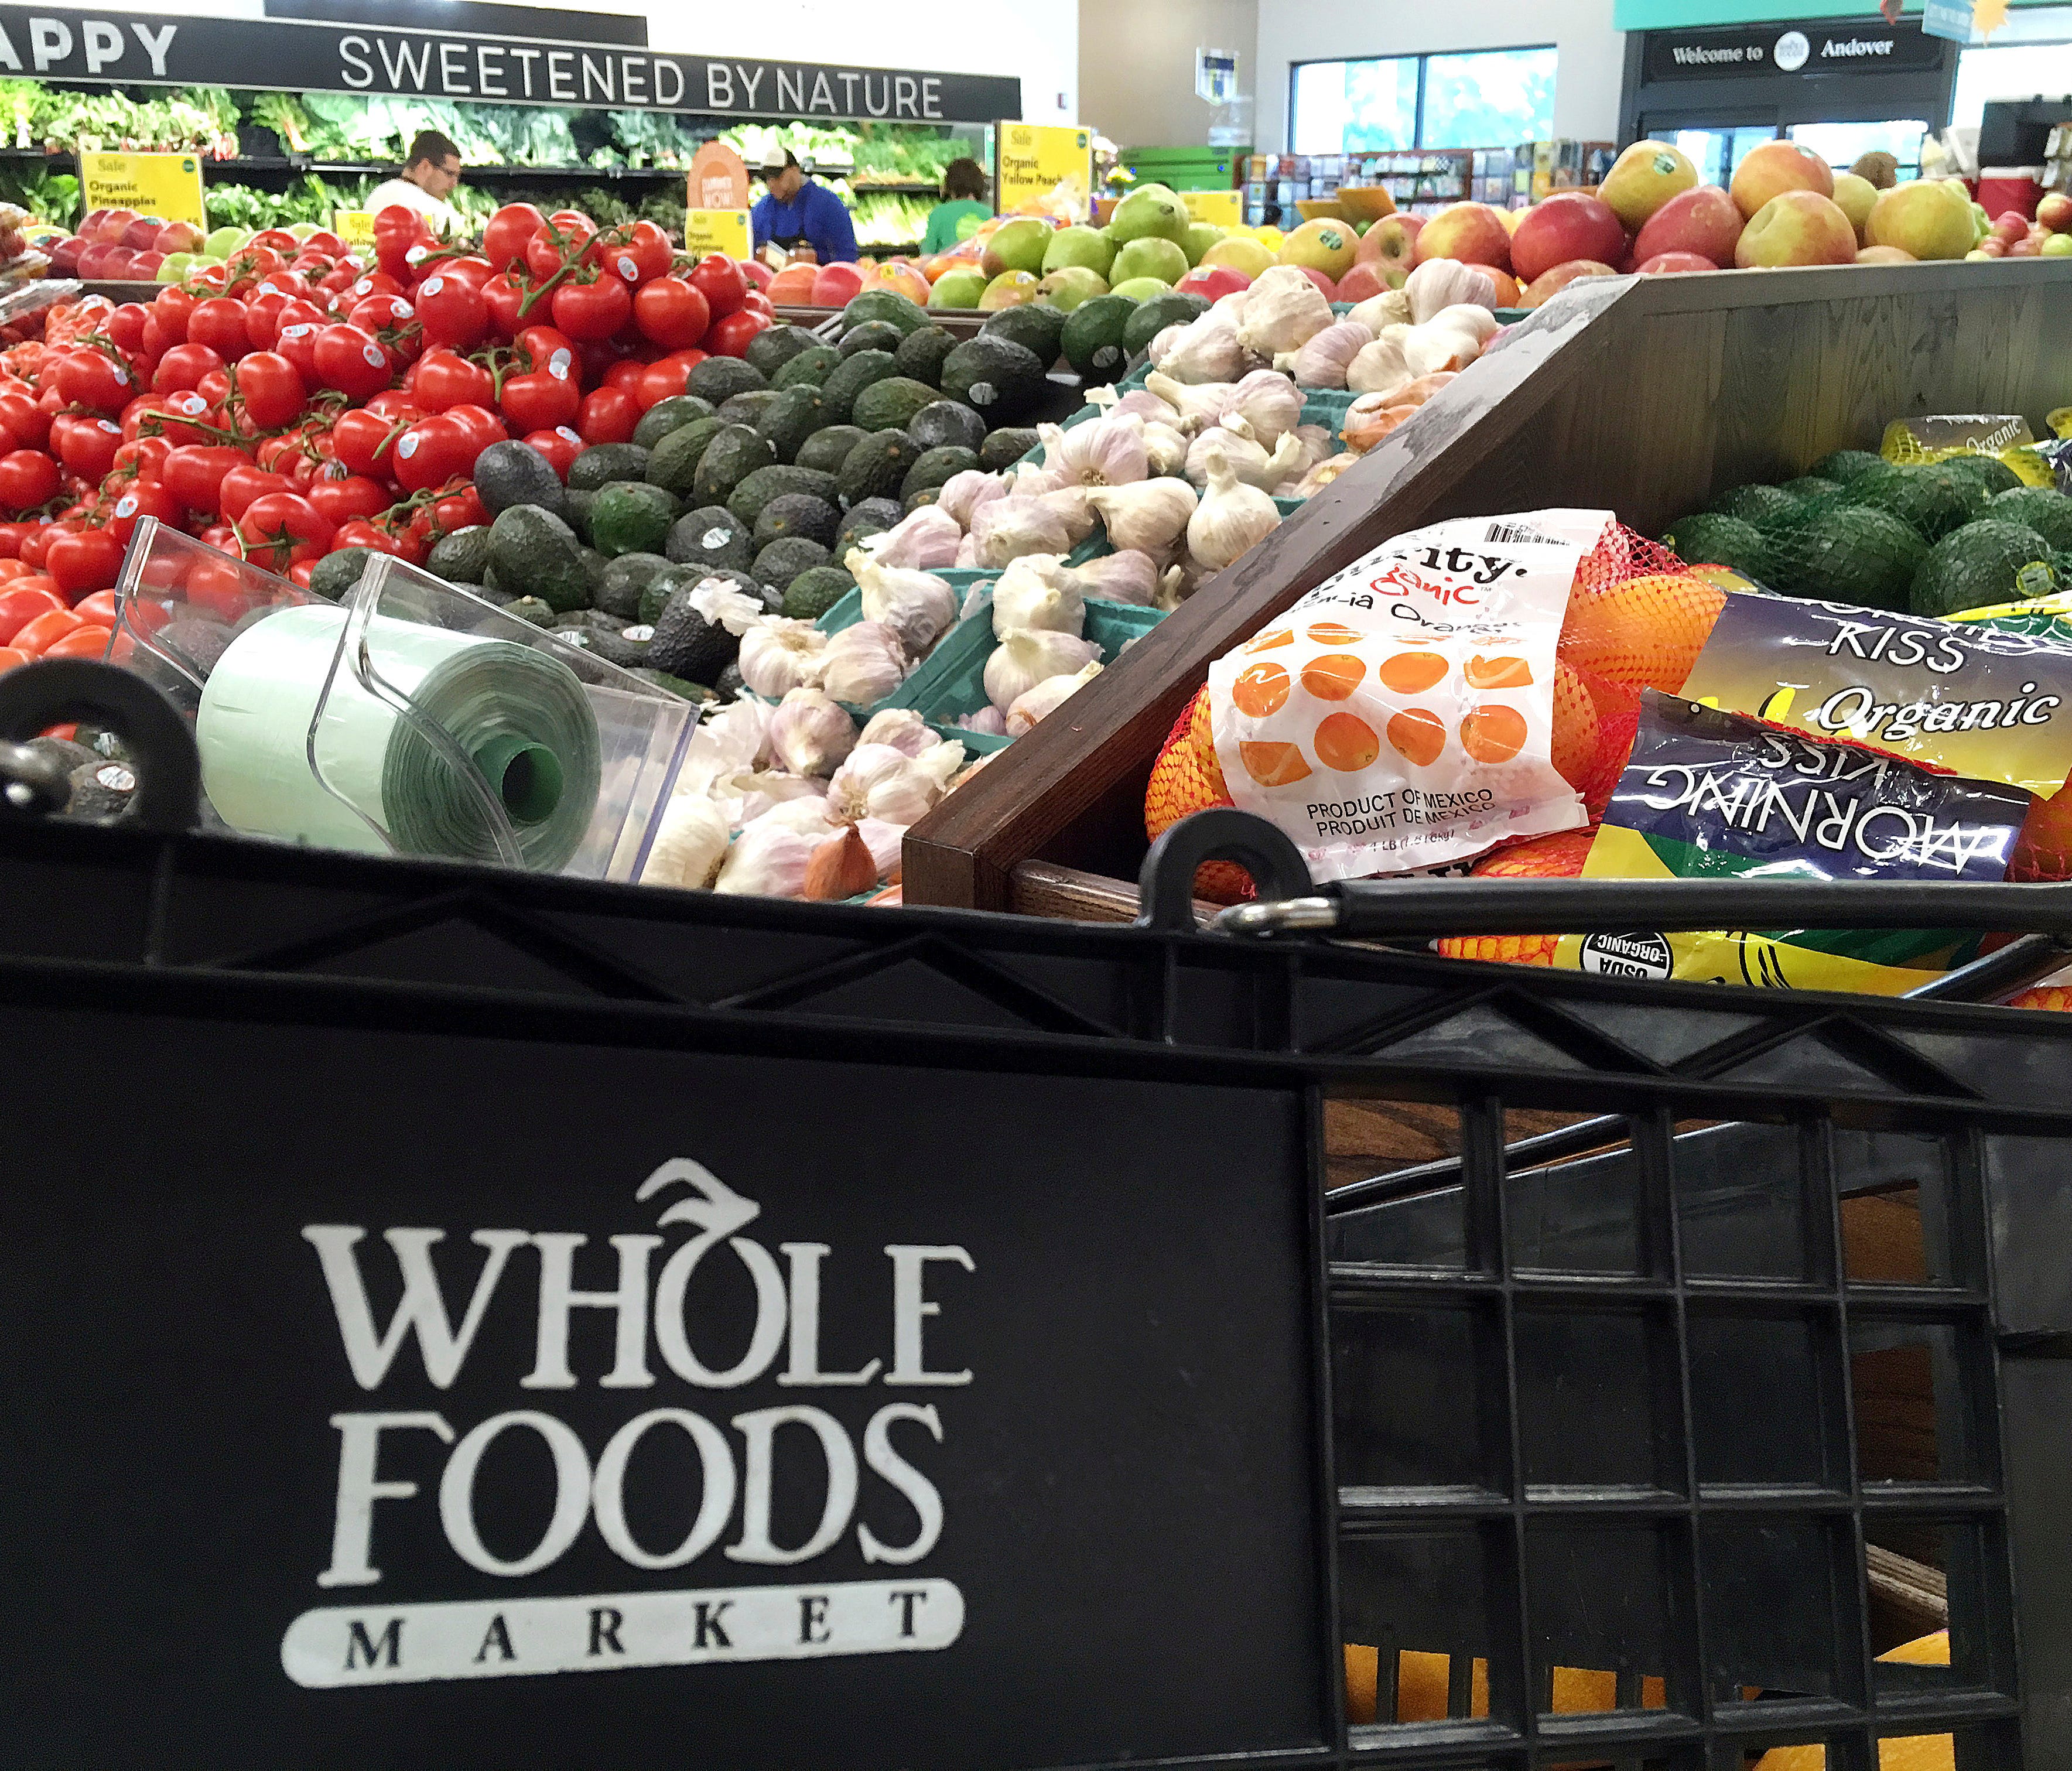 Amazon has announced it'll lower prices on select Whole Foods merchandise, starting Monday.